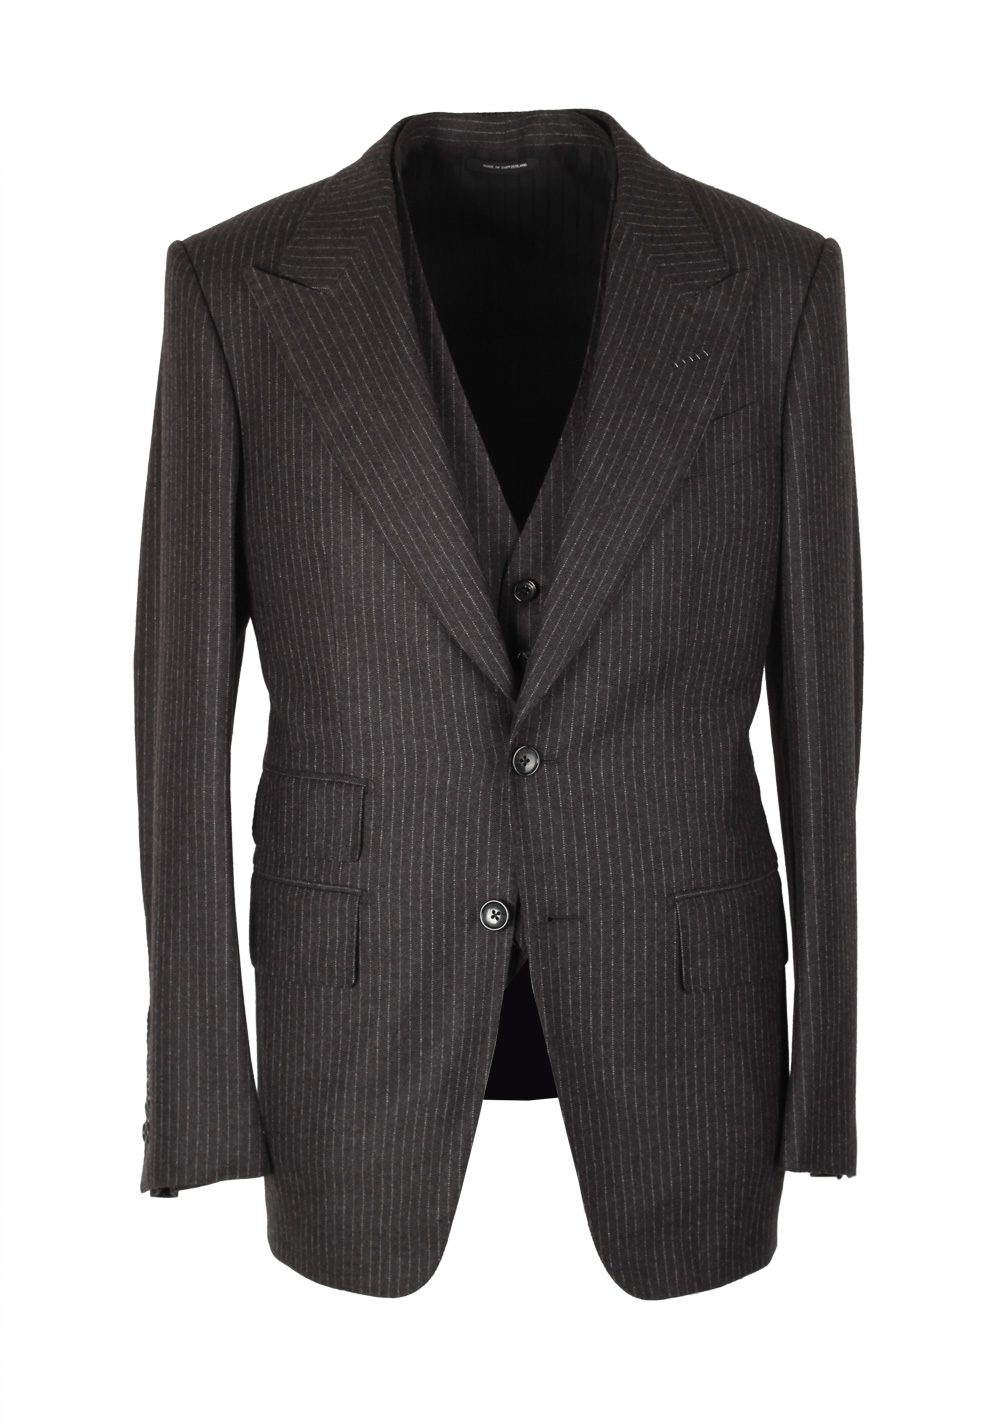 TOM FORD Shelton Gray Striped 3 Piece Suit Size 46 / 36R U.S. Wool ...